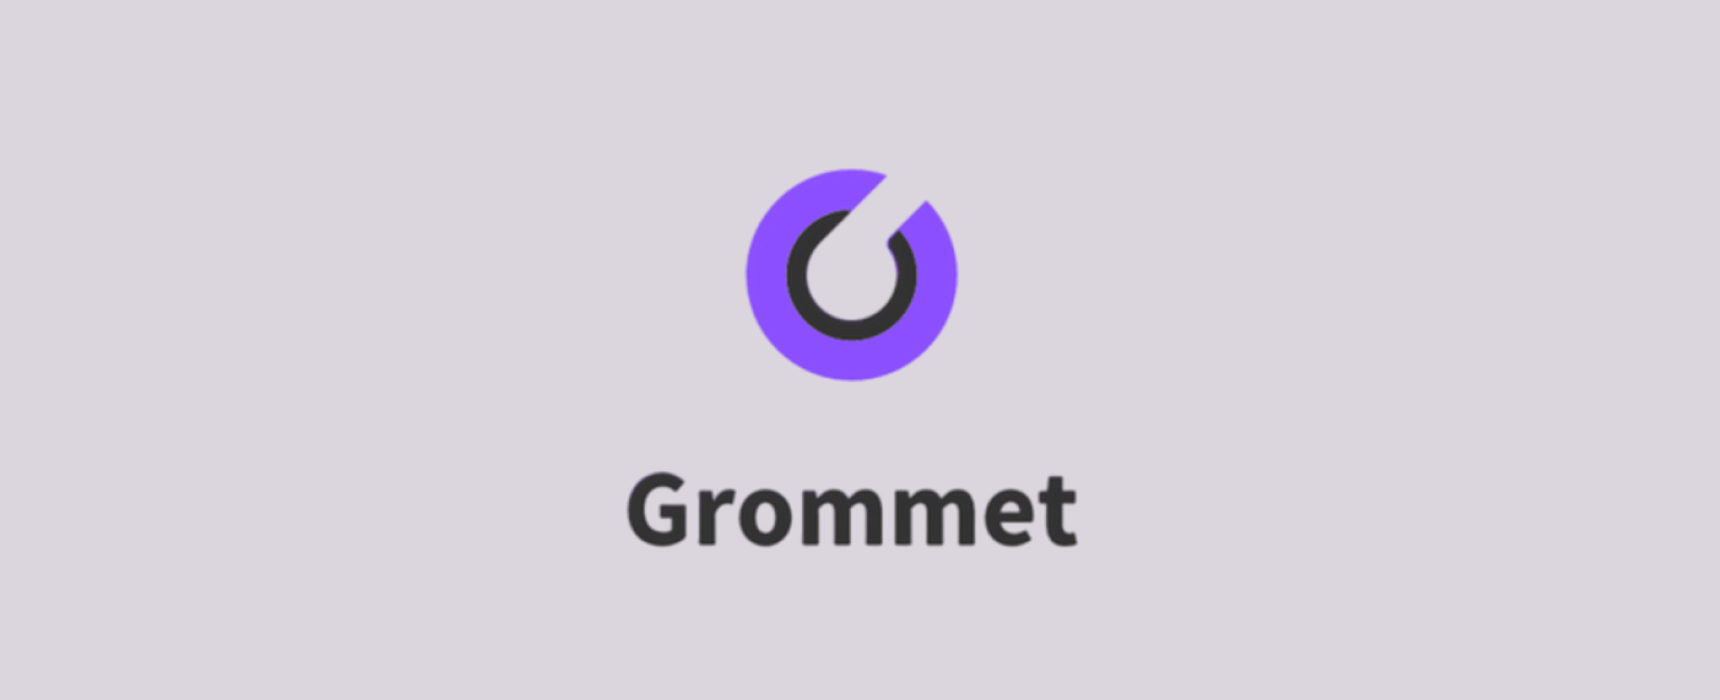 Grommet - React Component Library